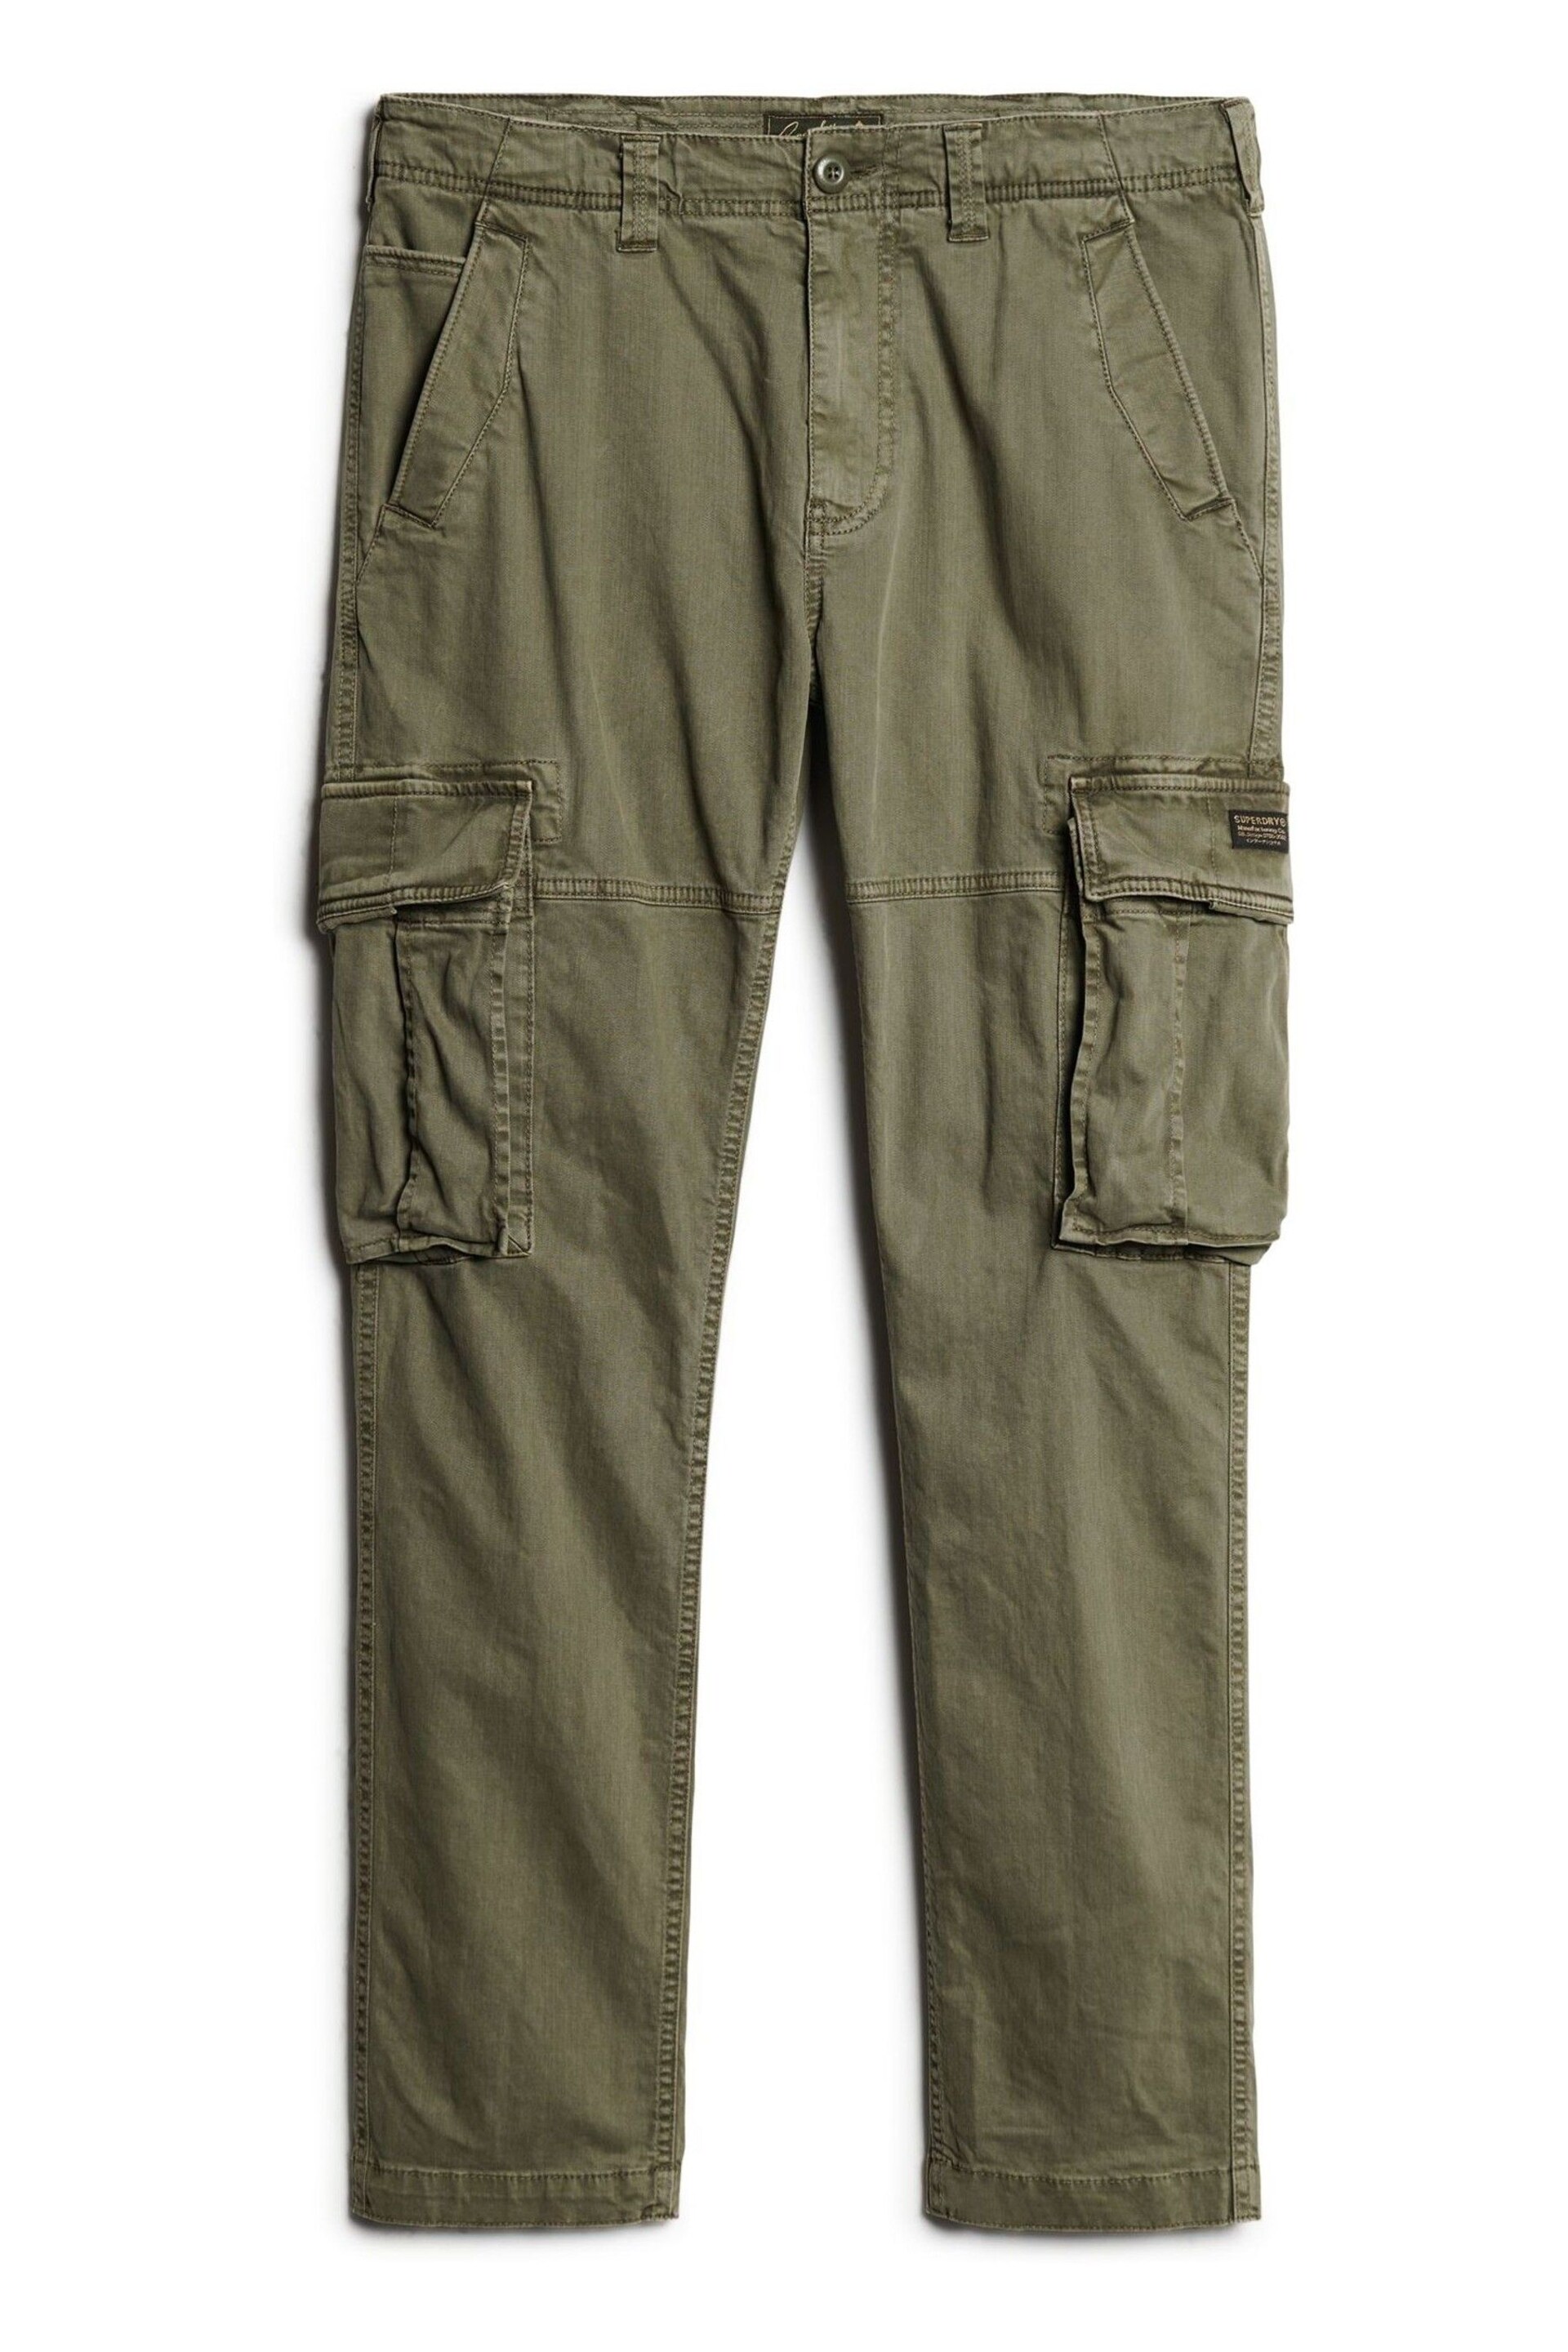 Superdry Green Core Cargo Trousers - Image 5 of 7